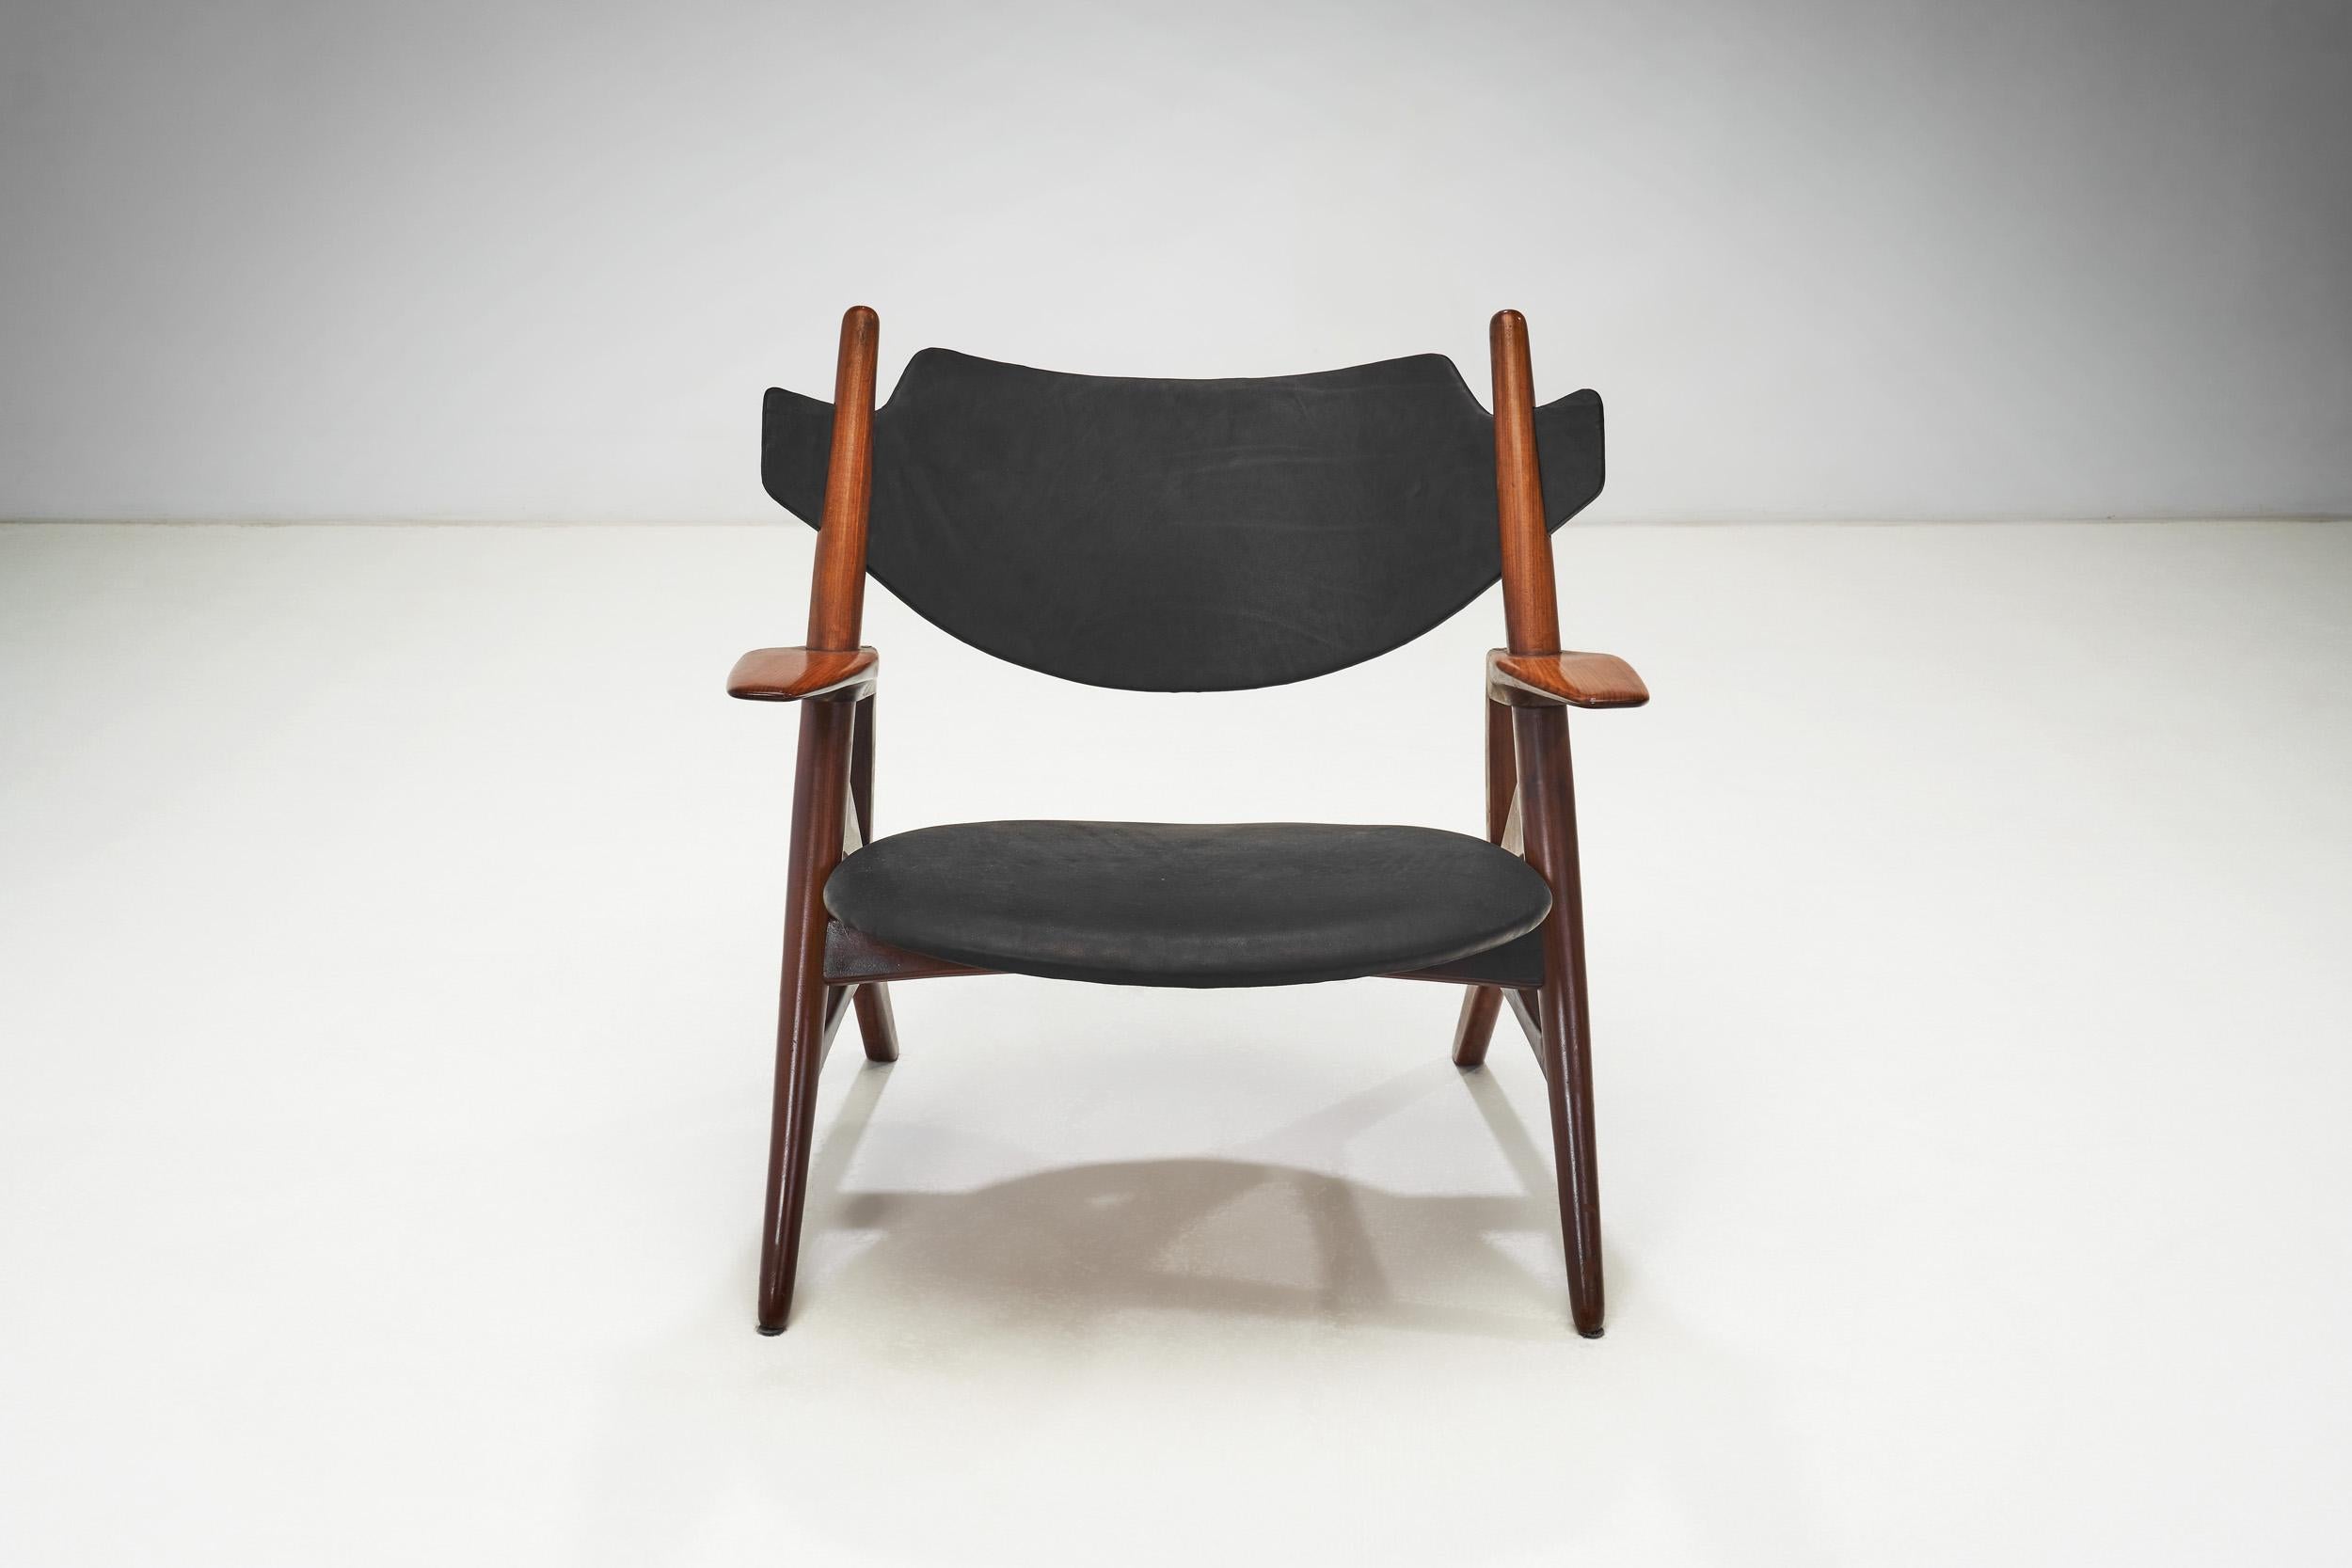 Set of 2 Sculptural Danish Mid-Century Modern Chairs, Denmark ca 1960s For Sale 1